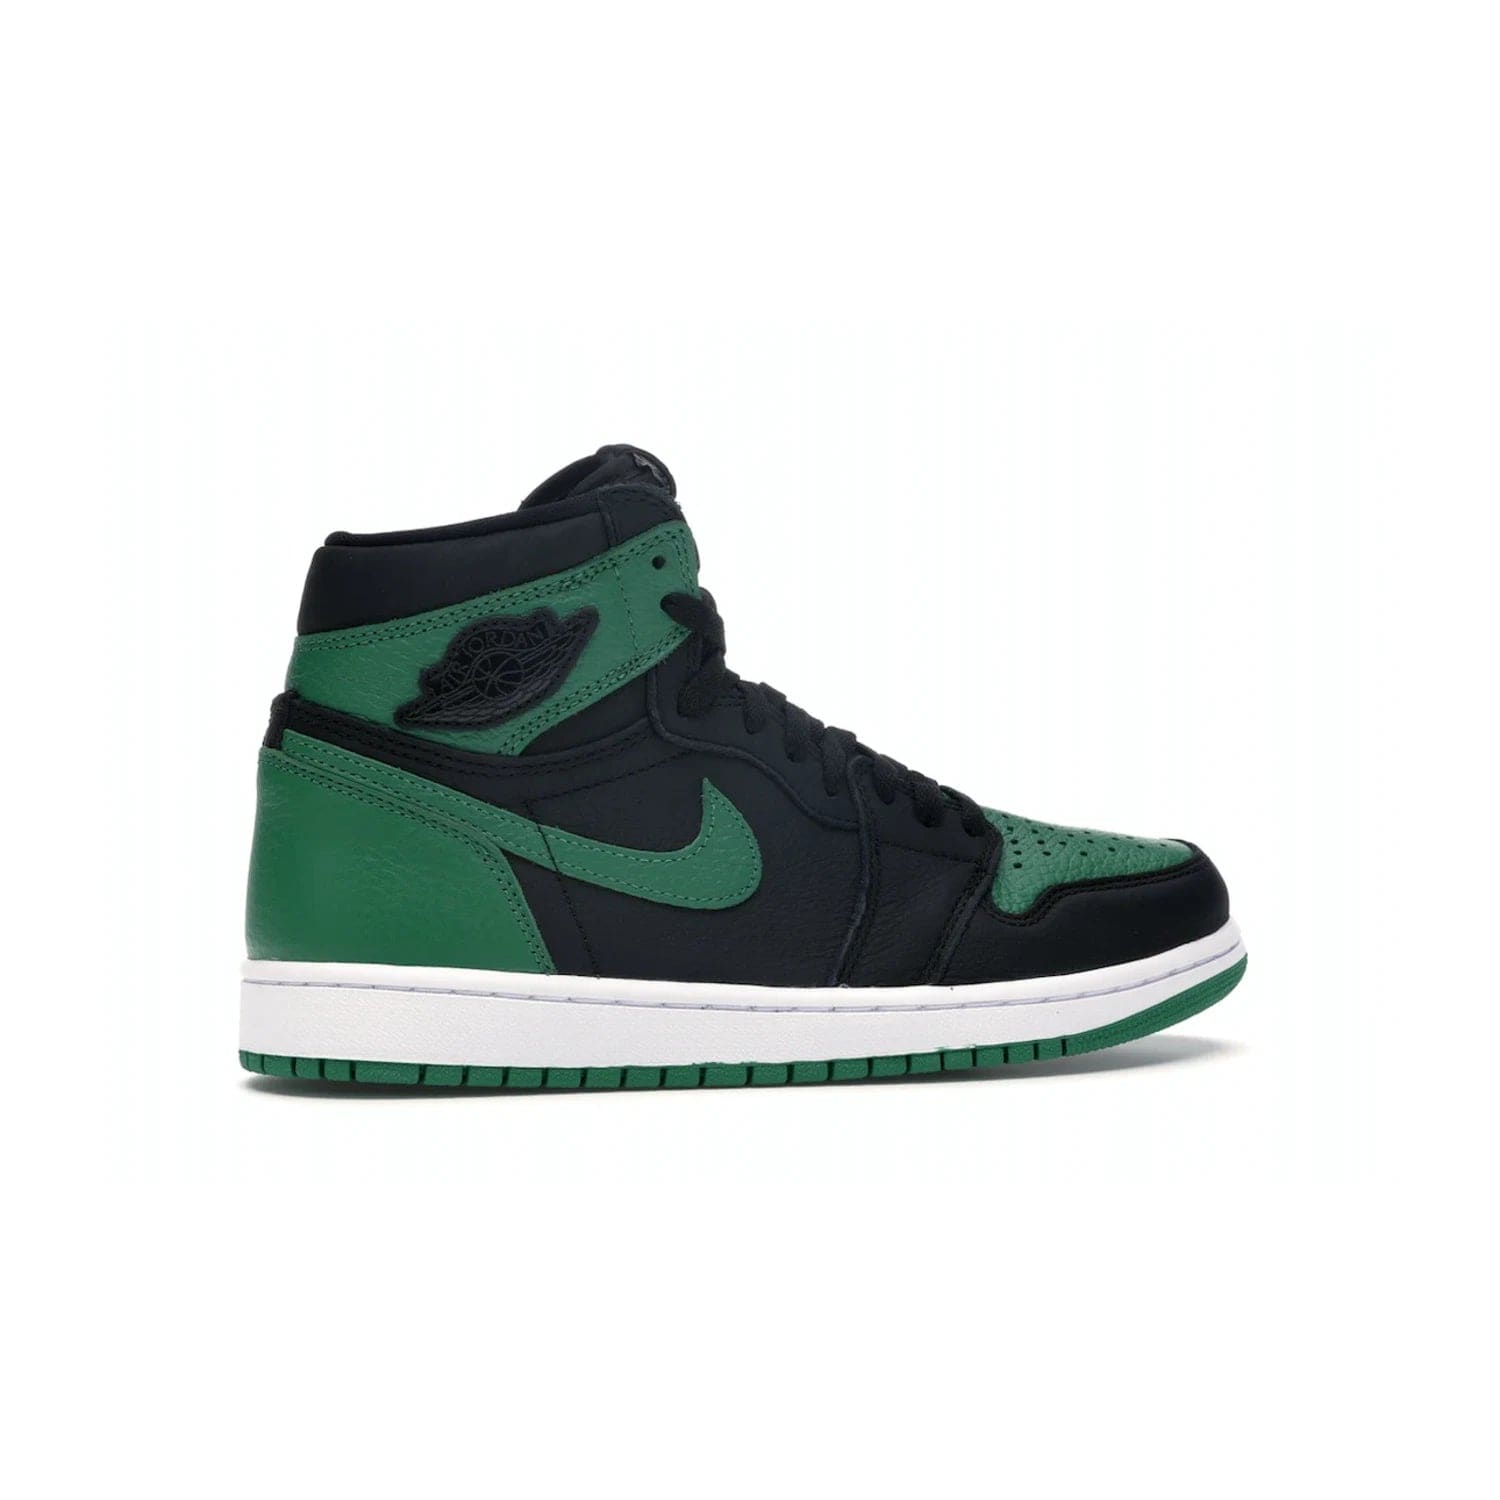 Jordan 1 Retro High Pine Green Black - Image 35 - Only at www.BallersClubKickz.com - Step into fresh style with the Jordan 1 Retro High Pine Green Black. Combining a black tumbled leather upper with green leather overlays, this sneaker features a Gym Red embroidered tongue tag, sail midsole, and pine green outsole for iconic style with a unique twist.